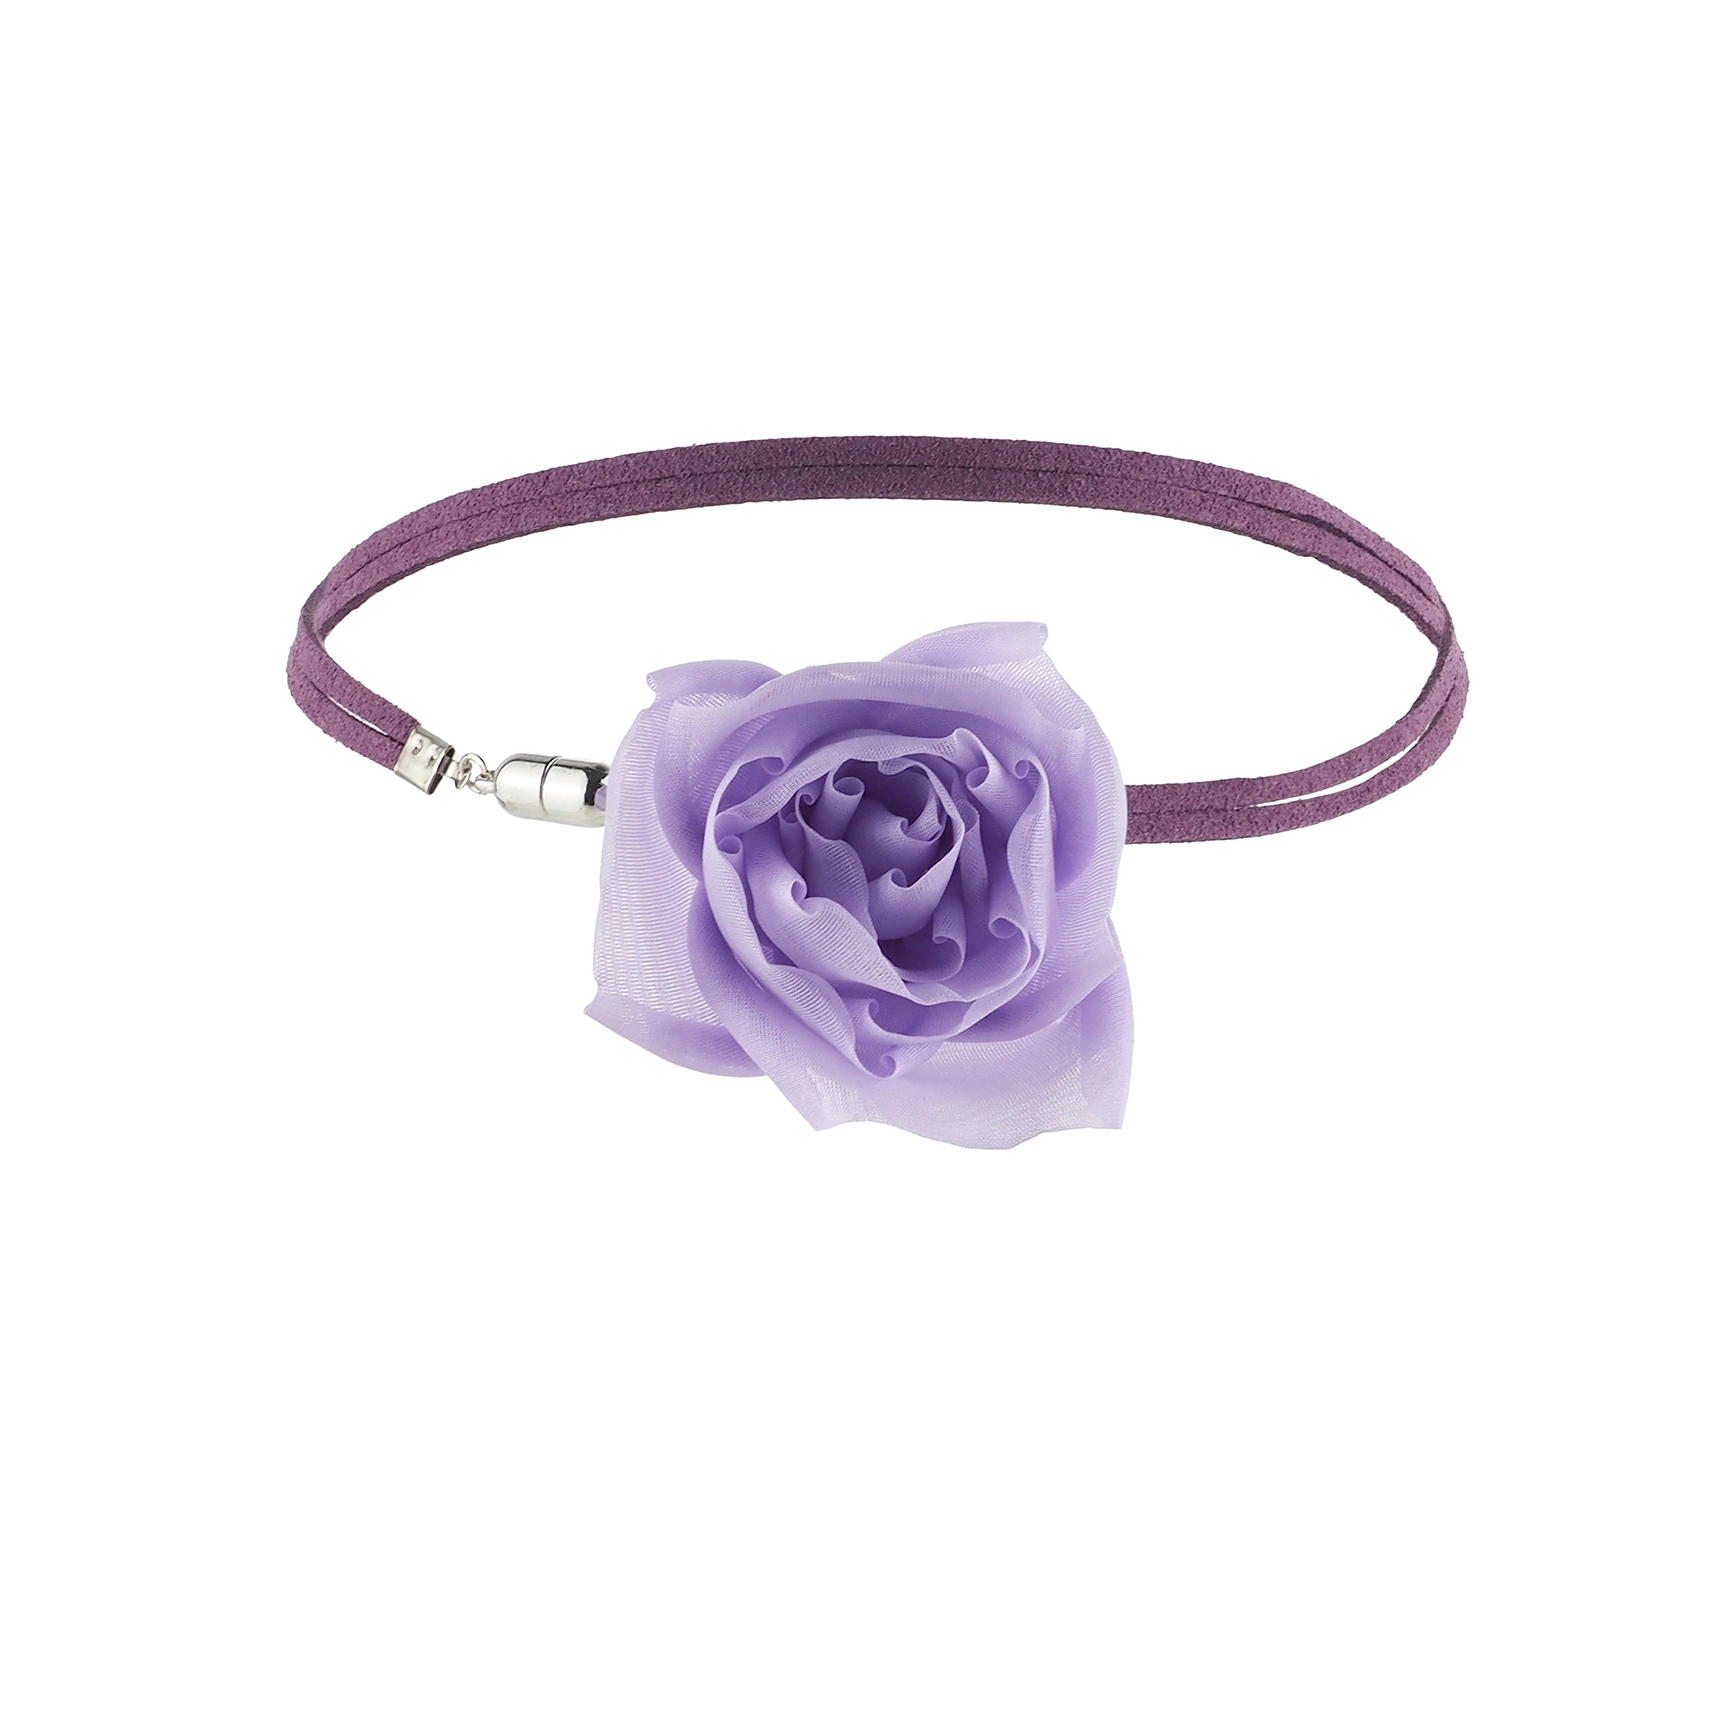 Purple Silk Organza Rose Choker Necklace with Toggle Clasp